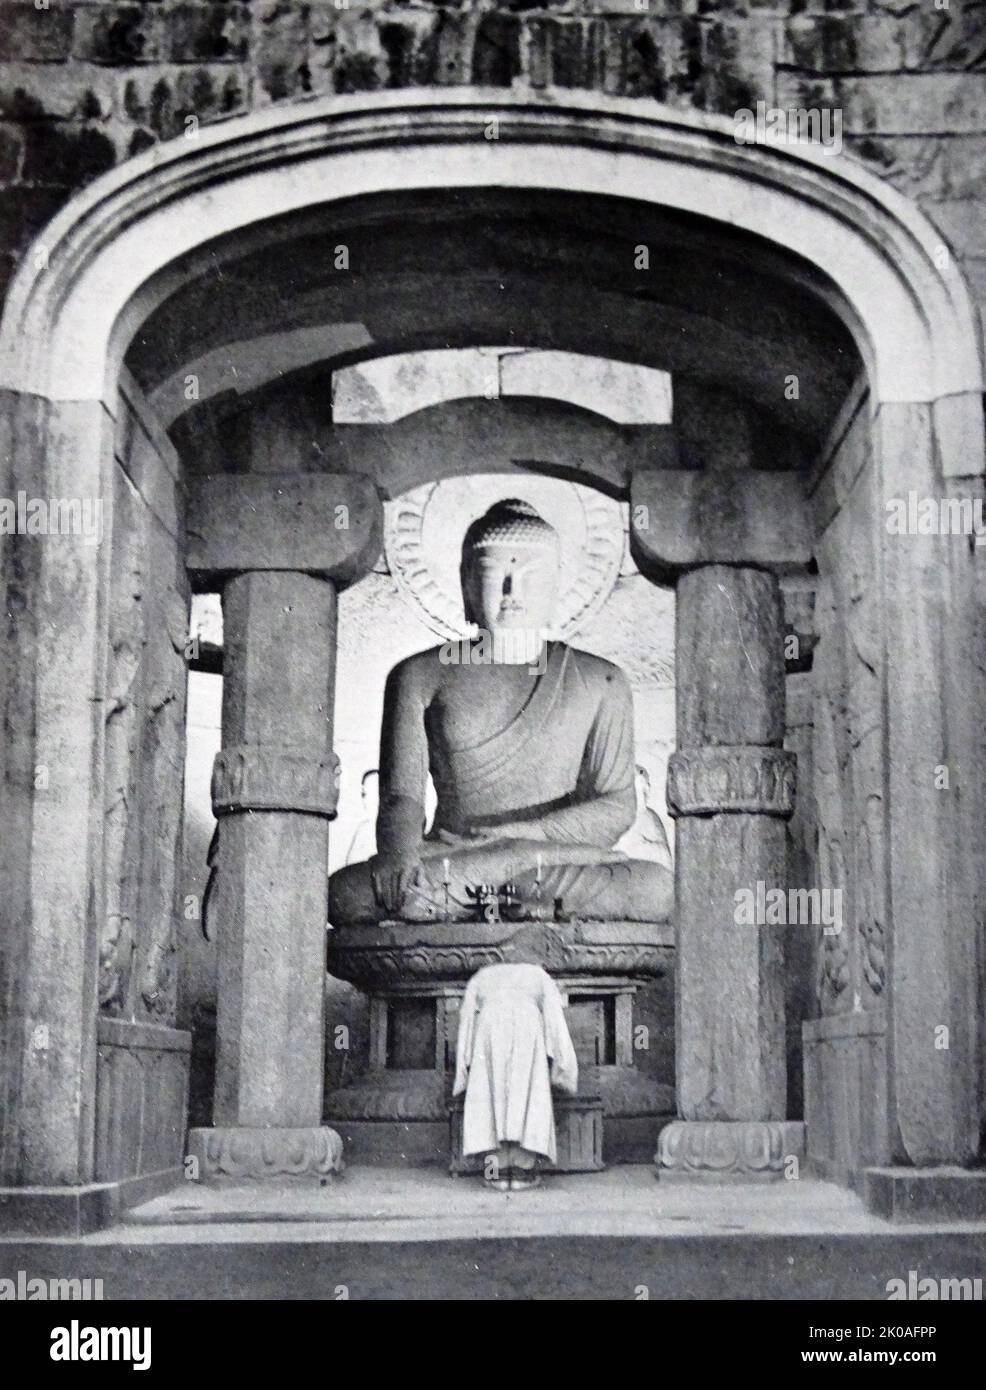 Sakyamuni Buddha in Seated Posture, from Silla period, South Korea. Height: 2.73m. It is known to be one of the greatest masterpieces of stone Buddhas in the world. It is remarked especially for its elegance and loftiness. This is the principal image in the Seok-gu-ram Grotto (Cave Temple) in Kyeongju, South Korea. The grotto is registered as a UNESCO World Heritage and as the Korean National Treasure number 24. The Seokguram Grotto was initiated in 751 by King Kyeongdeok of Silla and completed by his son in 774 by King Hyegong of Silla. The Grotto was built to illustrate the moment when Sakya Stock Photo